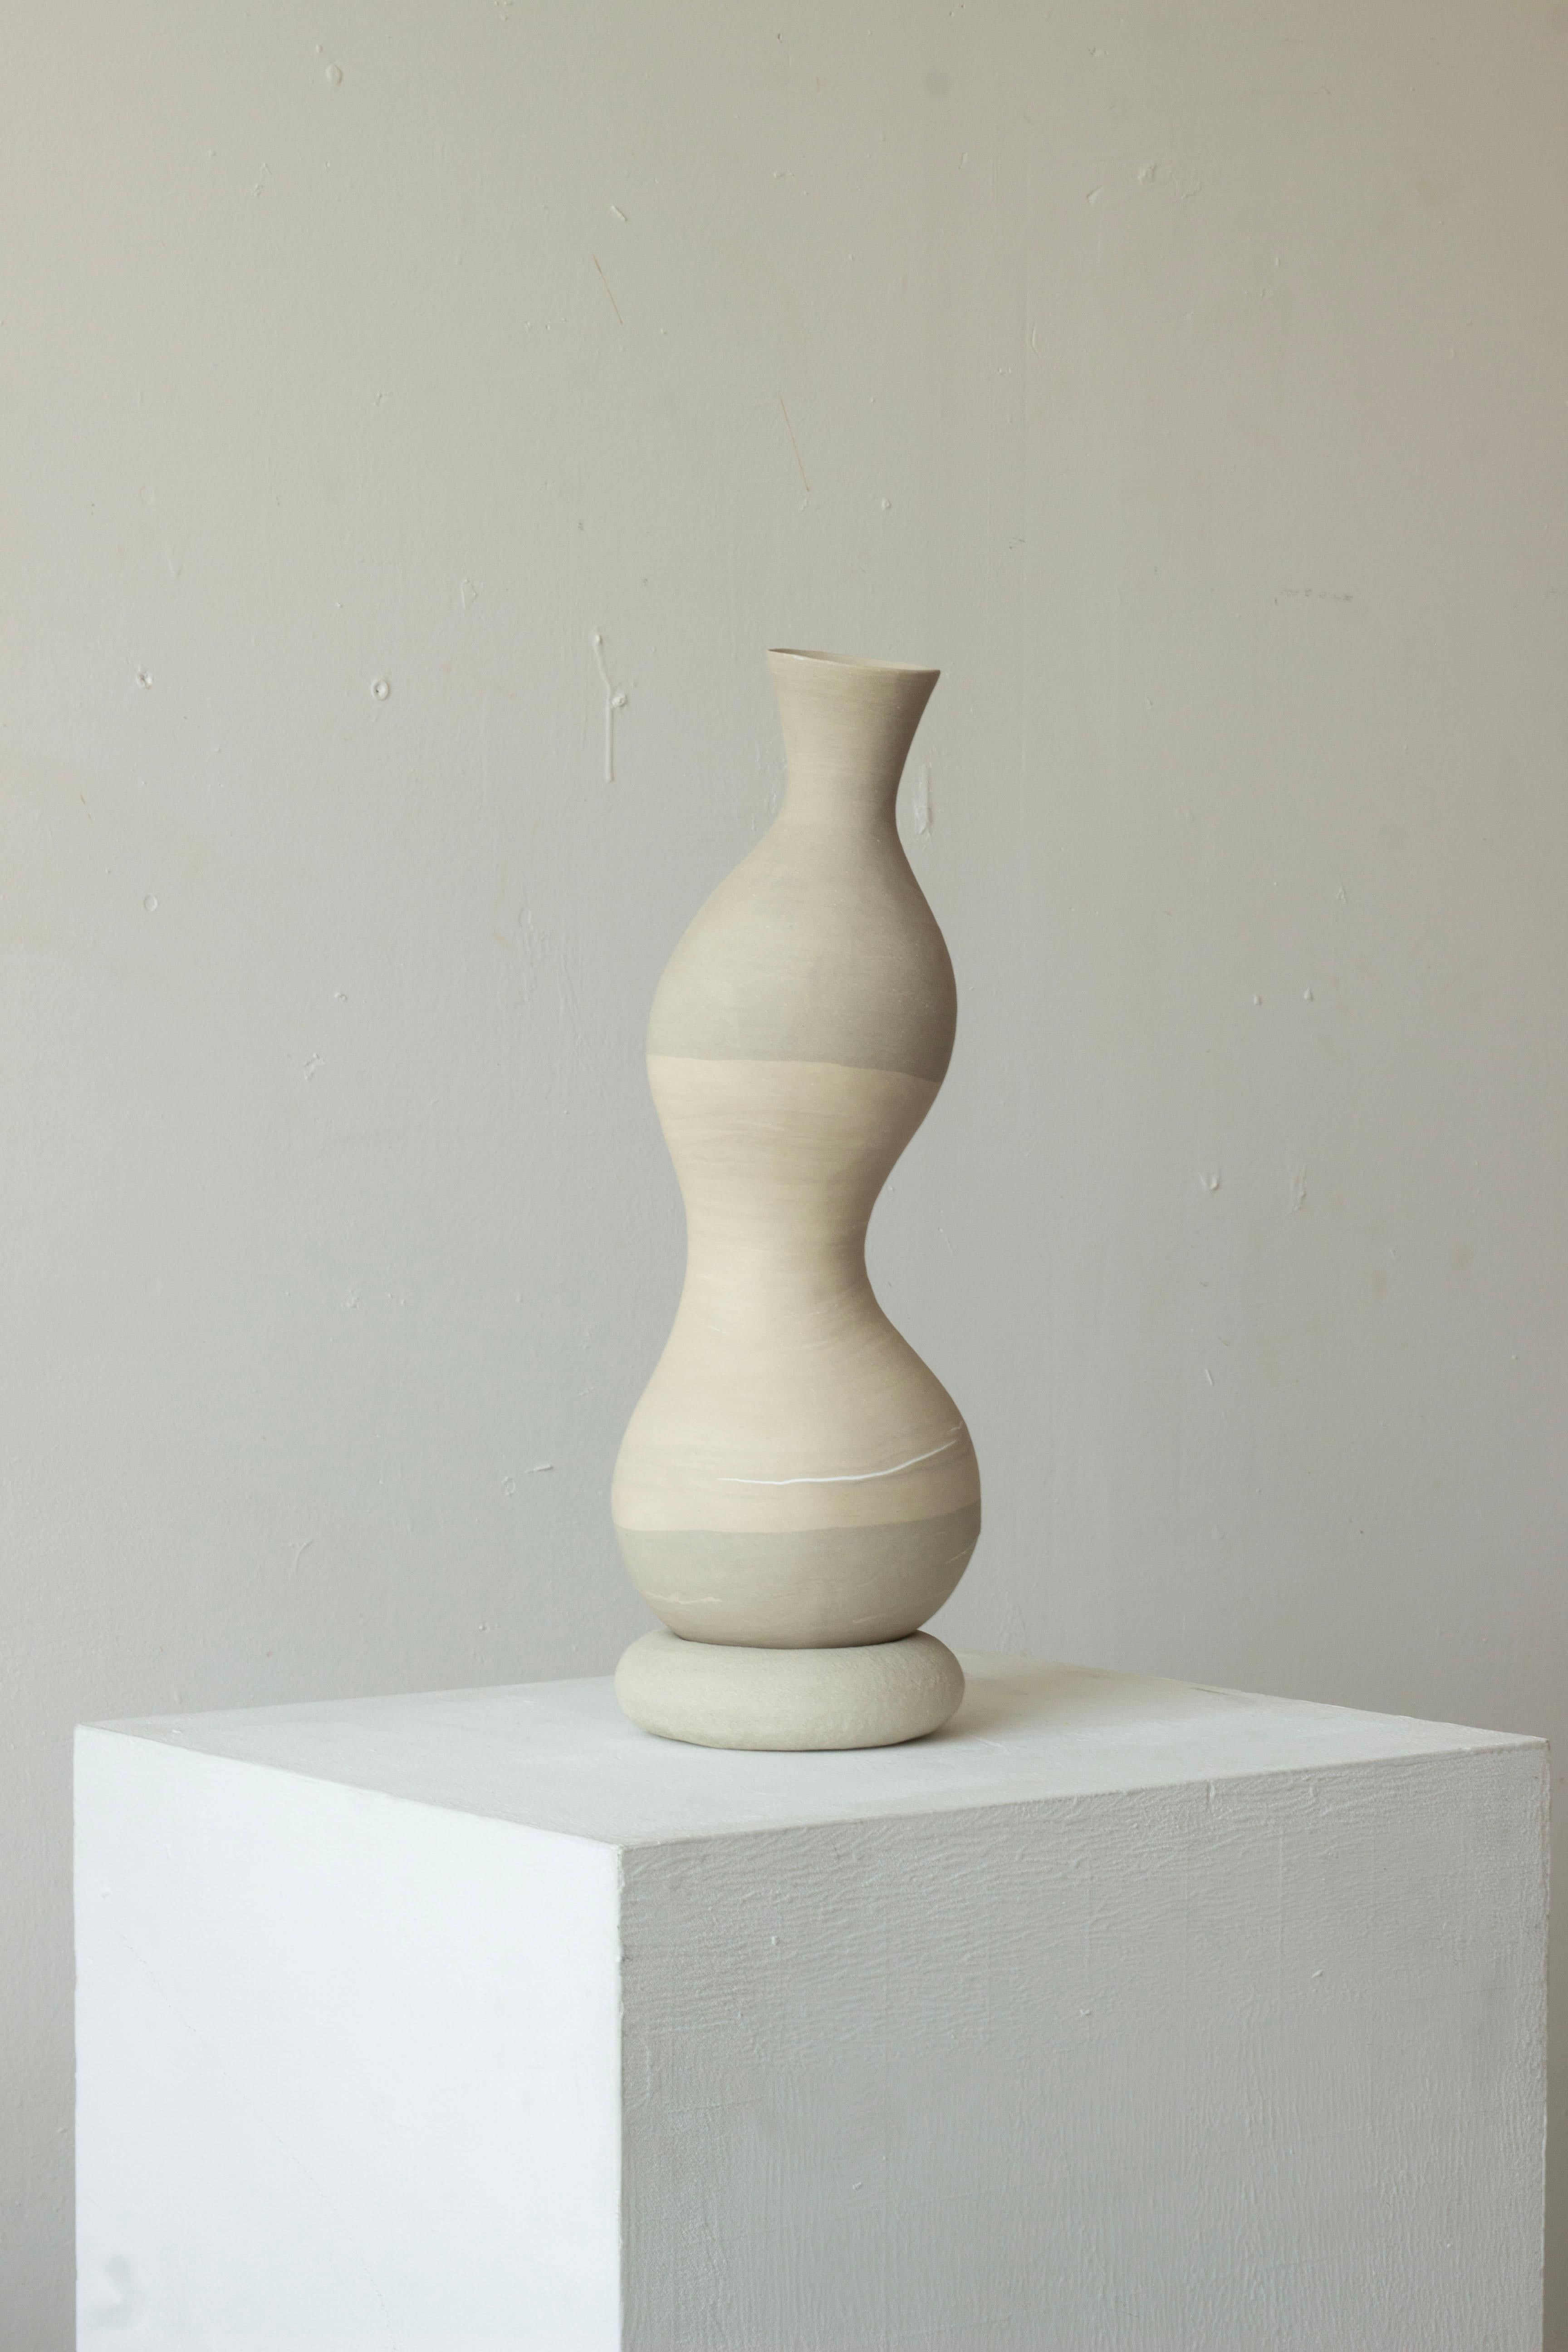 Woman Cracked But Healed 205 by Karina Smagulova
One of a Kind.
Dimensions: Ø 15 x H 43 cm.
Materials: White and grey stoneware and epoxy.
​
With an Armenian and Kazakhstan heritage, Karina Smagulova was born in Greece in 1995 and graduated with a